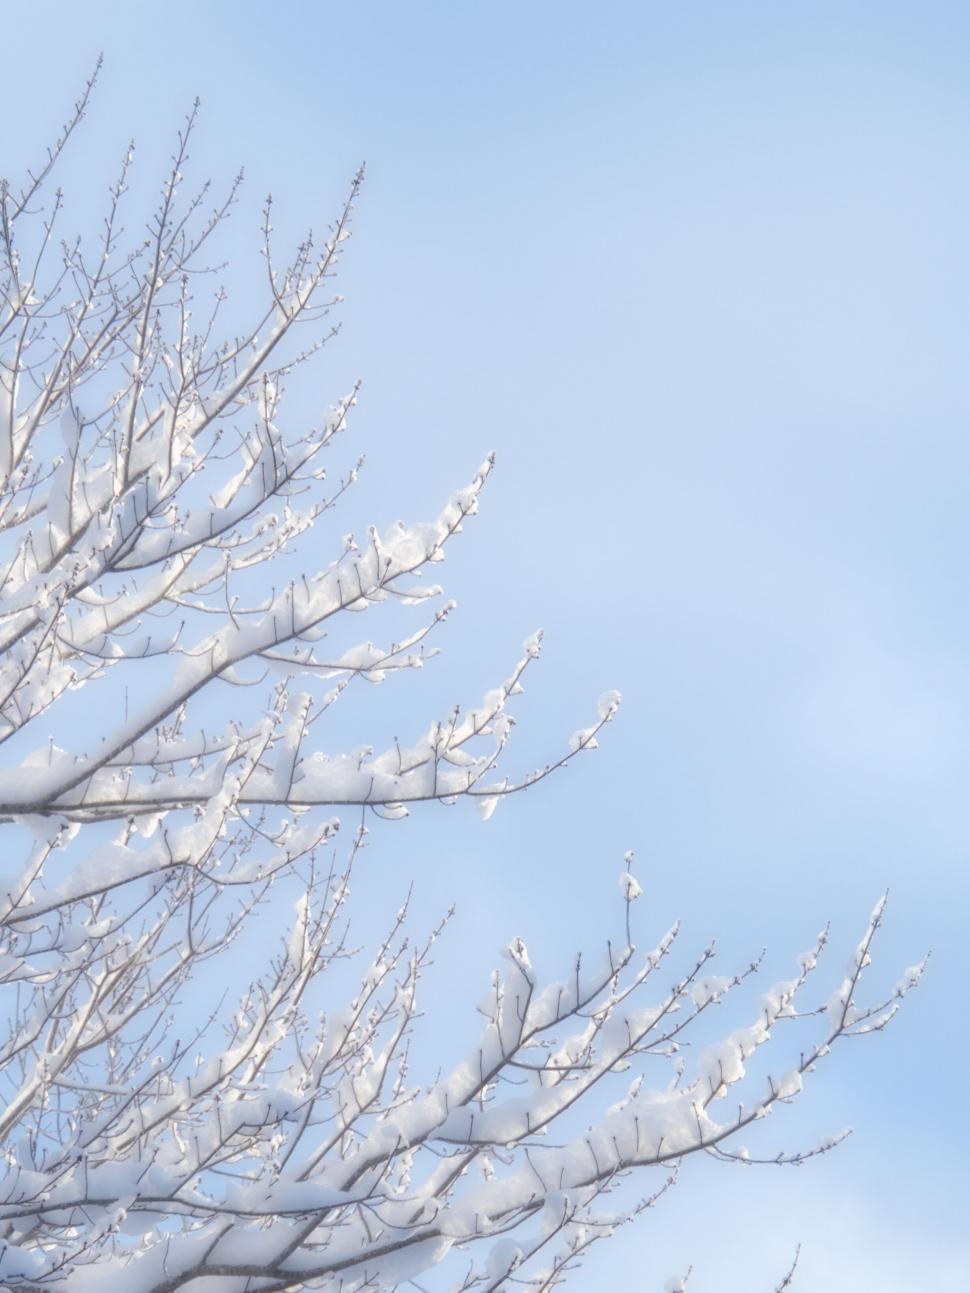 Free Image of Snow-laden branches against a clear blue sky 